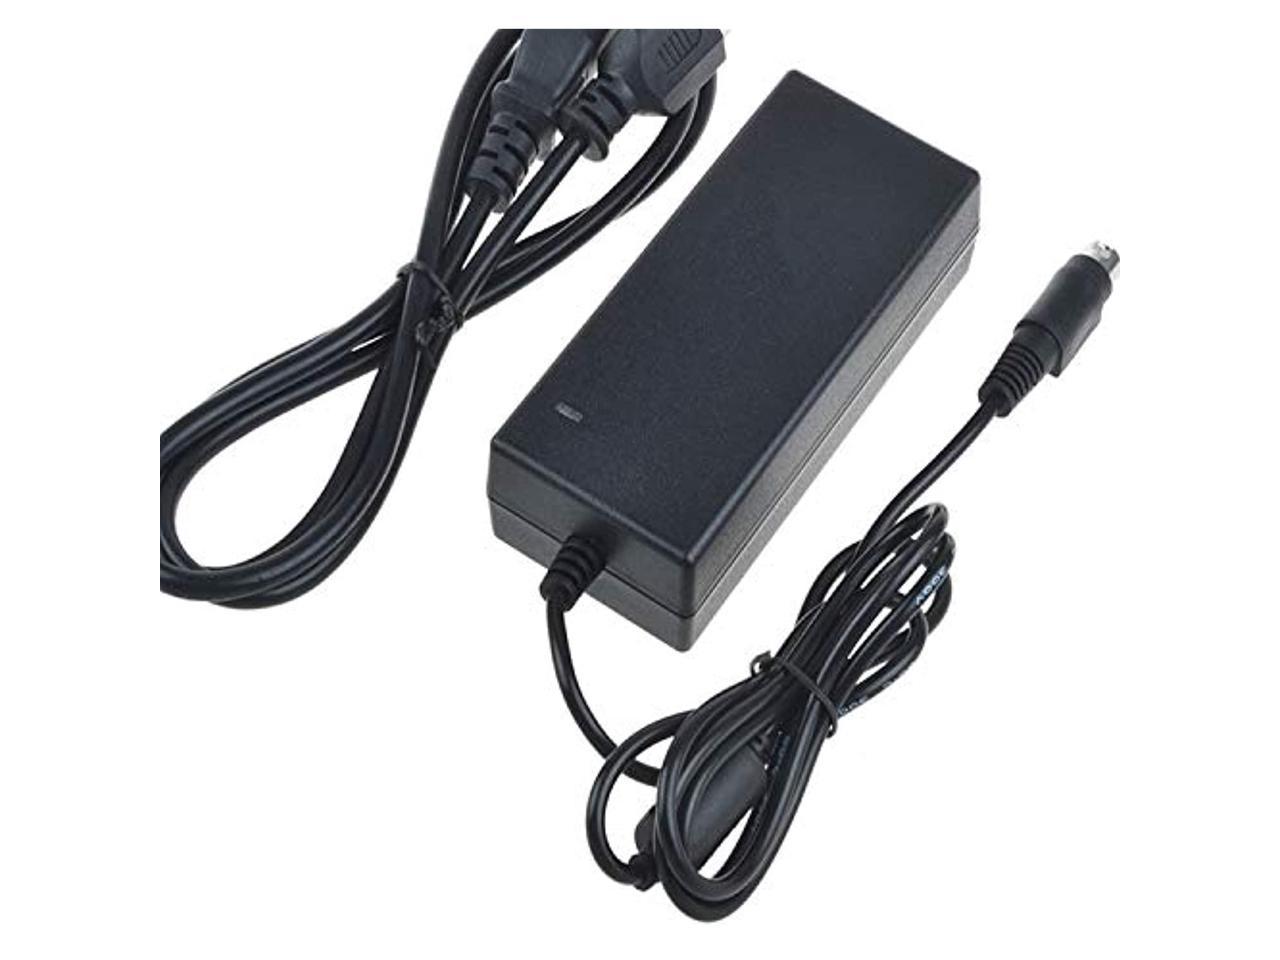 *Brand NEW*Data model SPV-1250 1250 12V 5A AC-DC Adapter Charger Power Supply Cord PSU